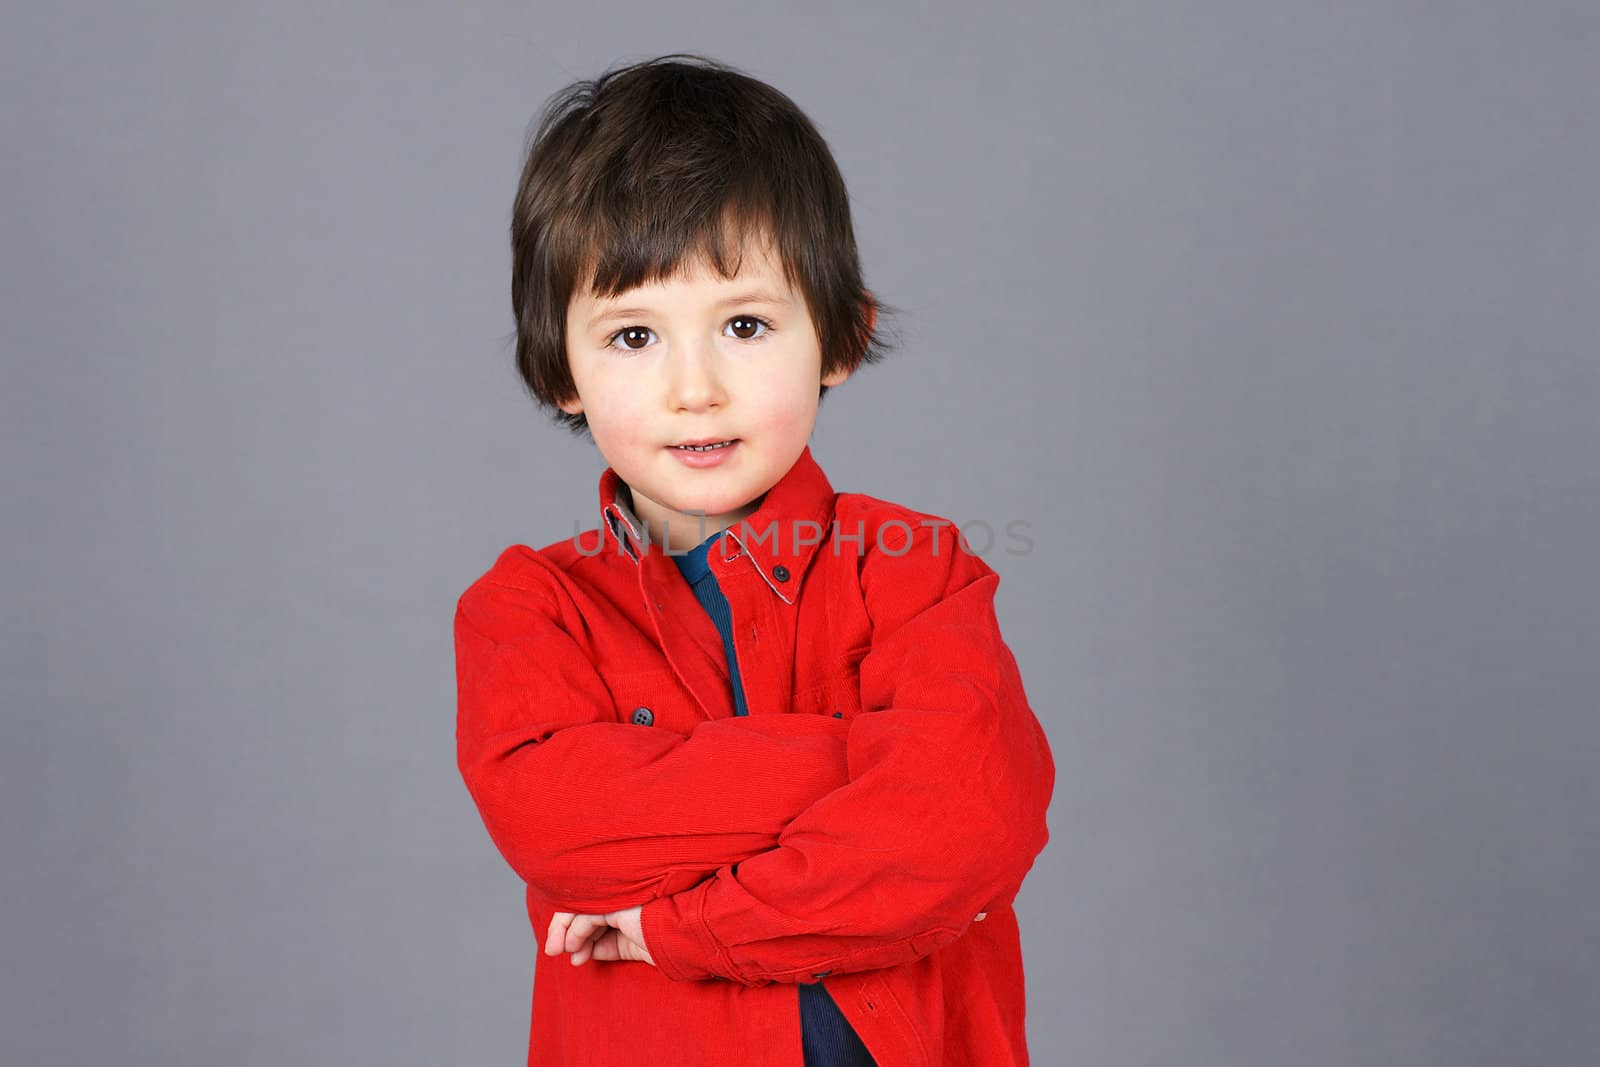 Cute little boy with little smile big brown eyes and crossed arms dressed in red shirt, studio shot over grey background.